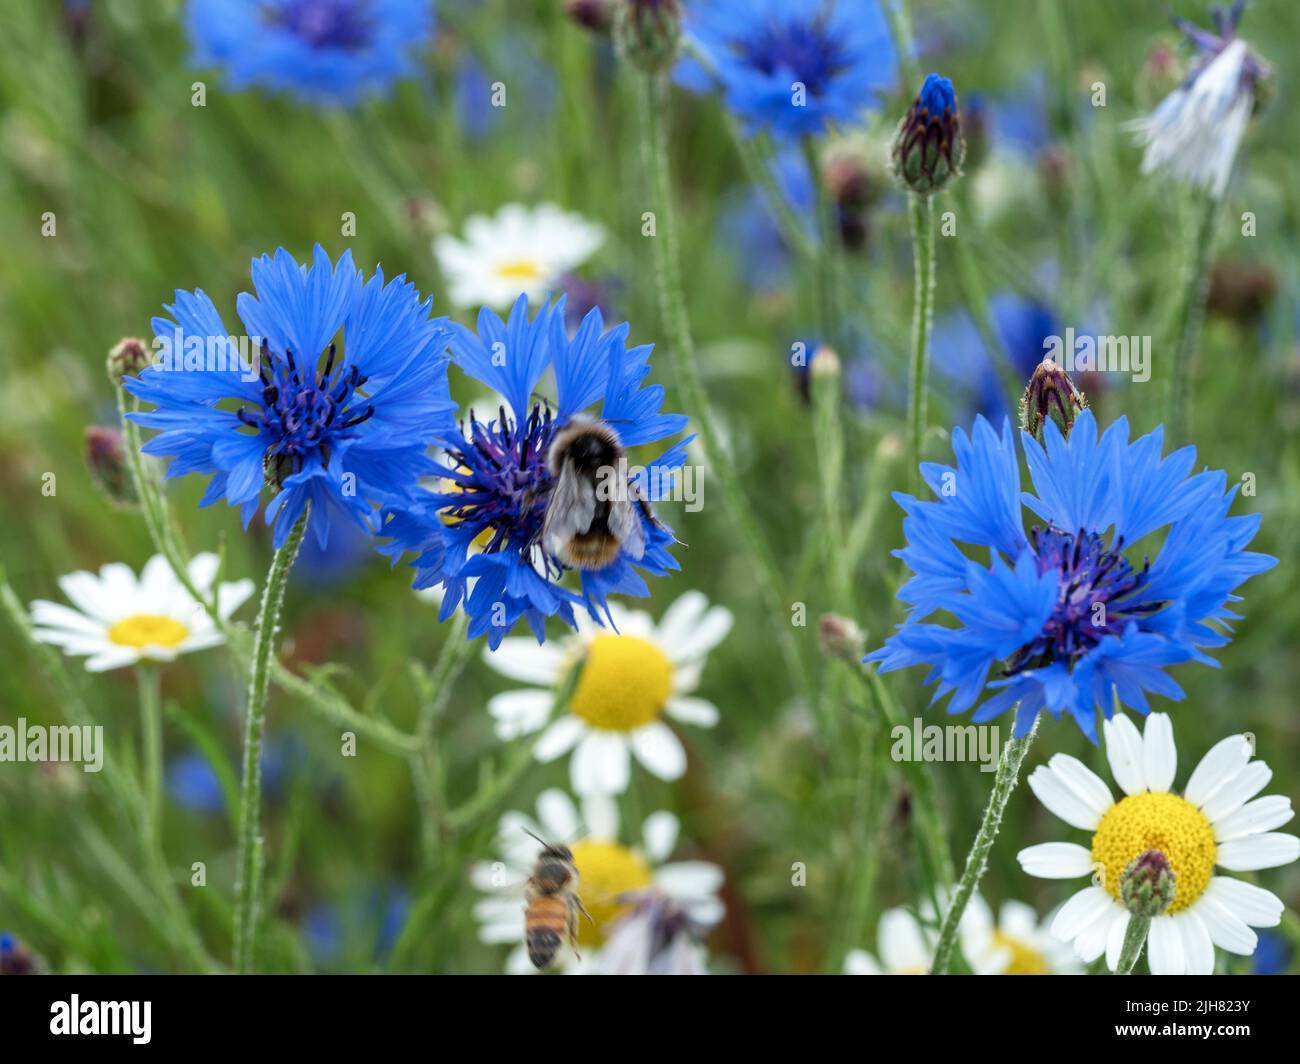 Cornflowers and daisies in a mixed flower meadow Stock Photo